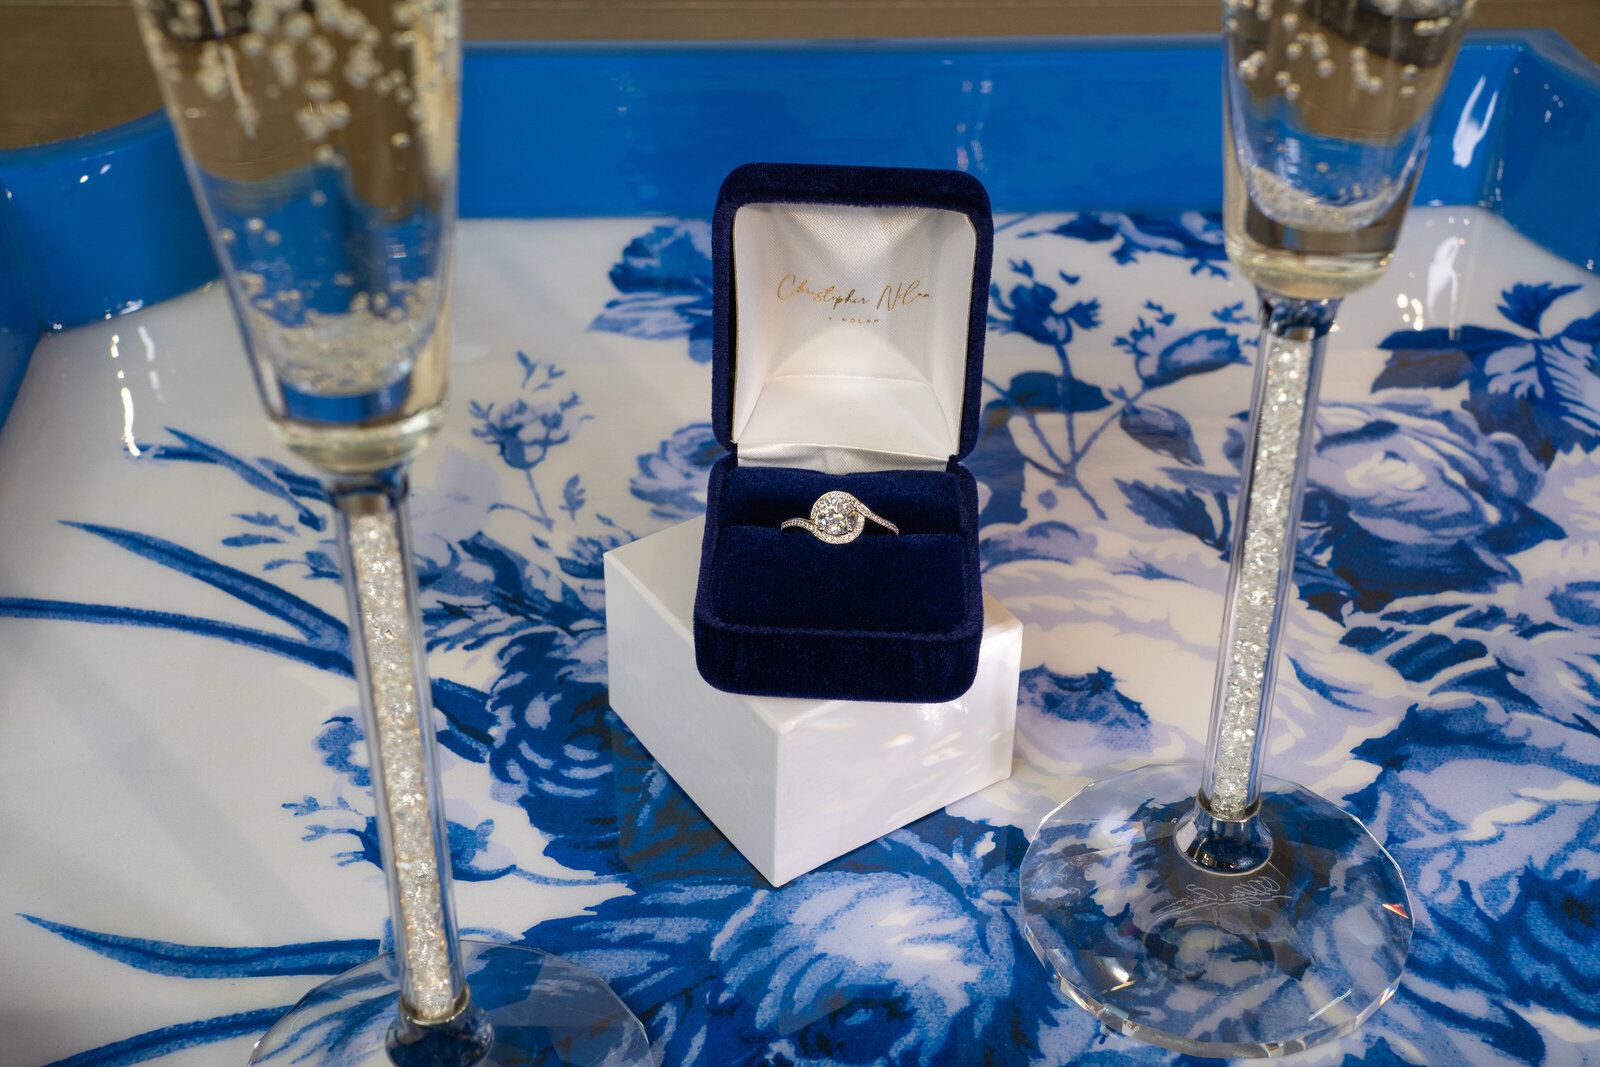 We offer a truly boutique jewelry design experience with complimentary refreshments